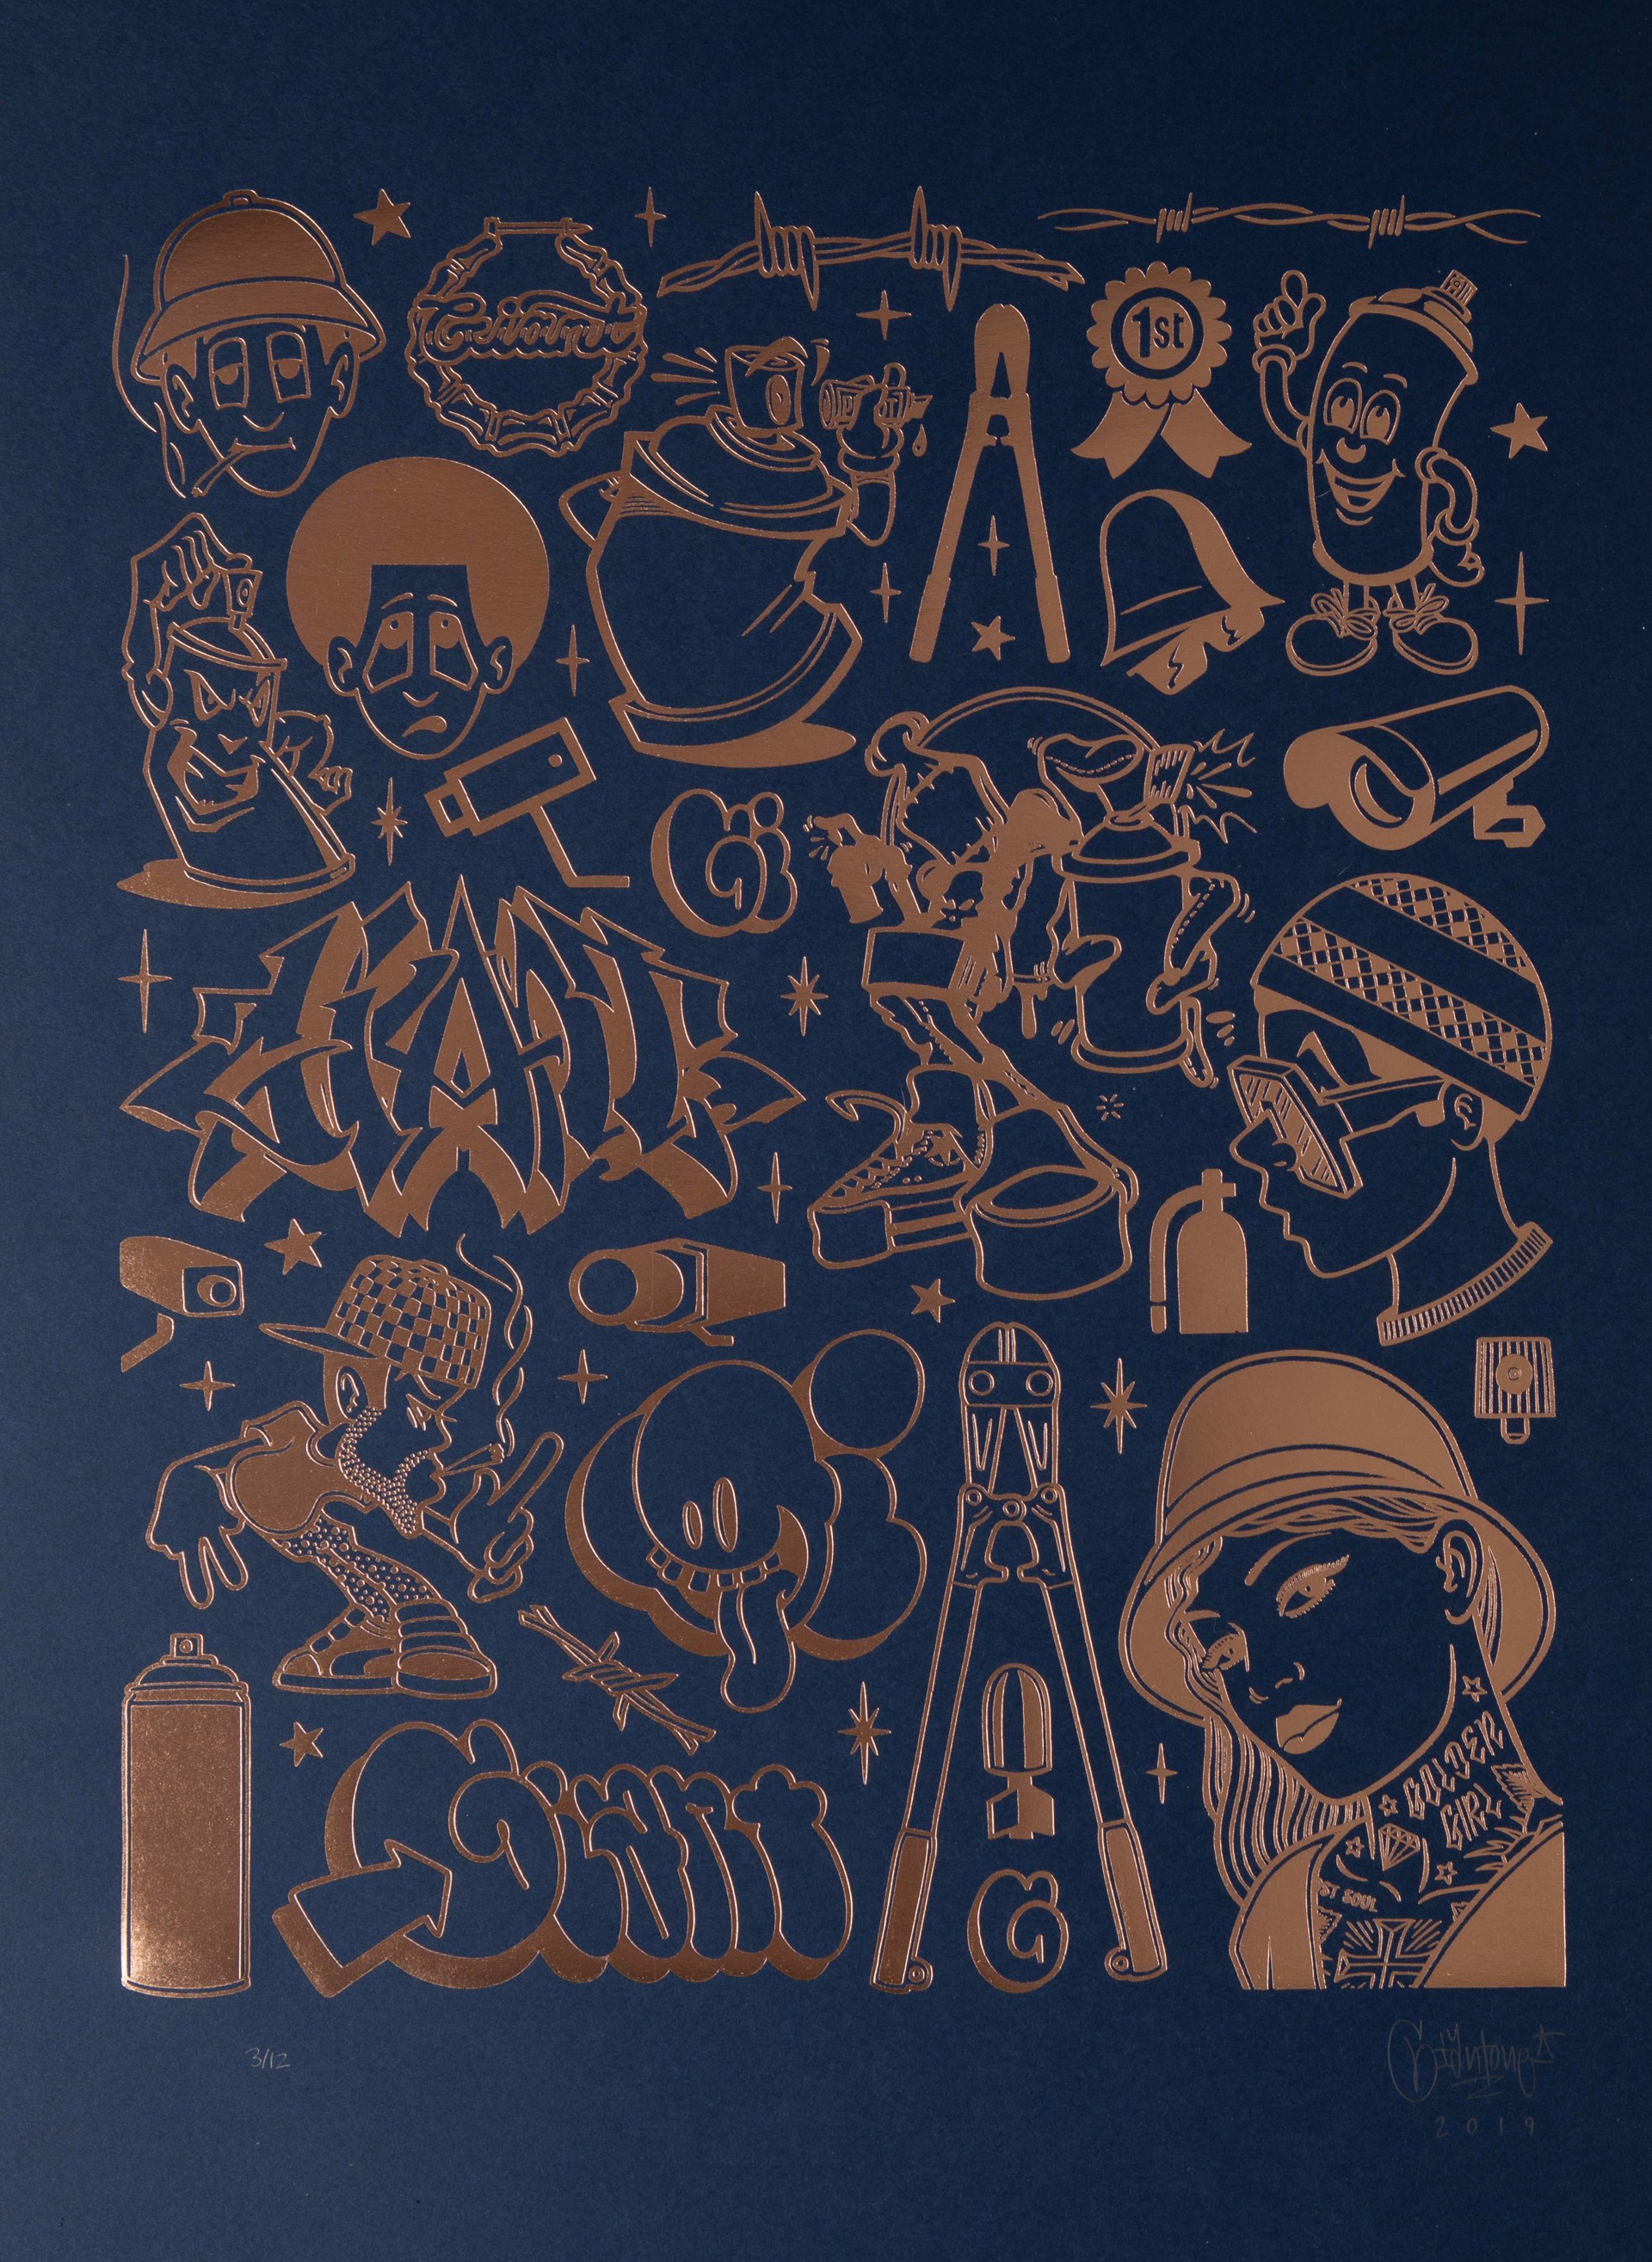 Modern Heiroglyphics - Graffiti: Copper Edition by Mike Giant